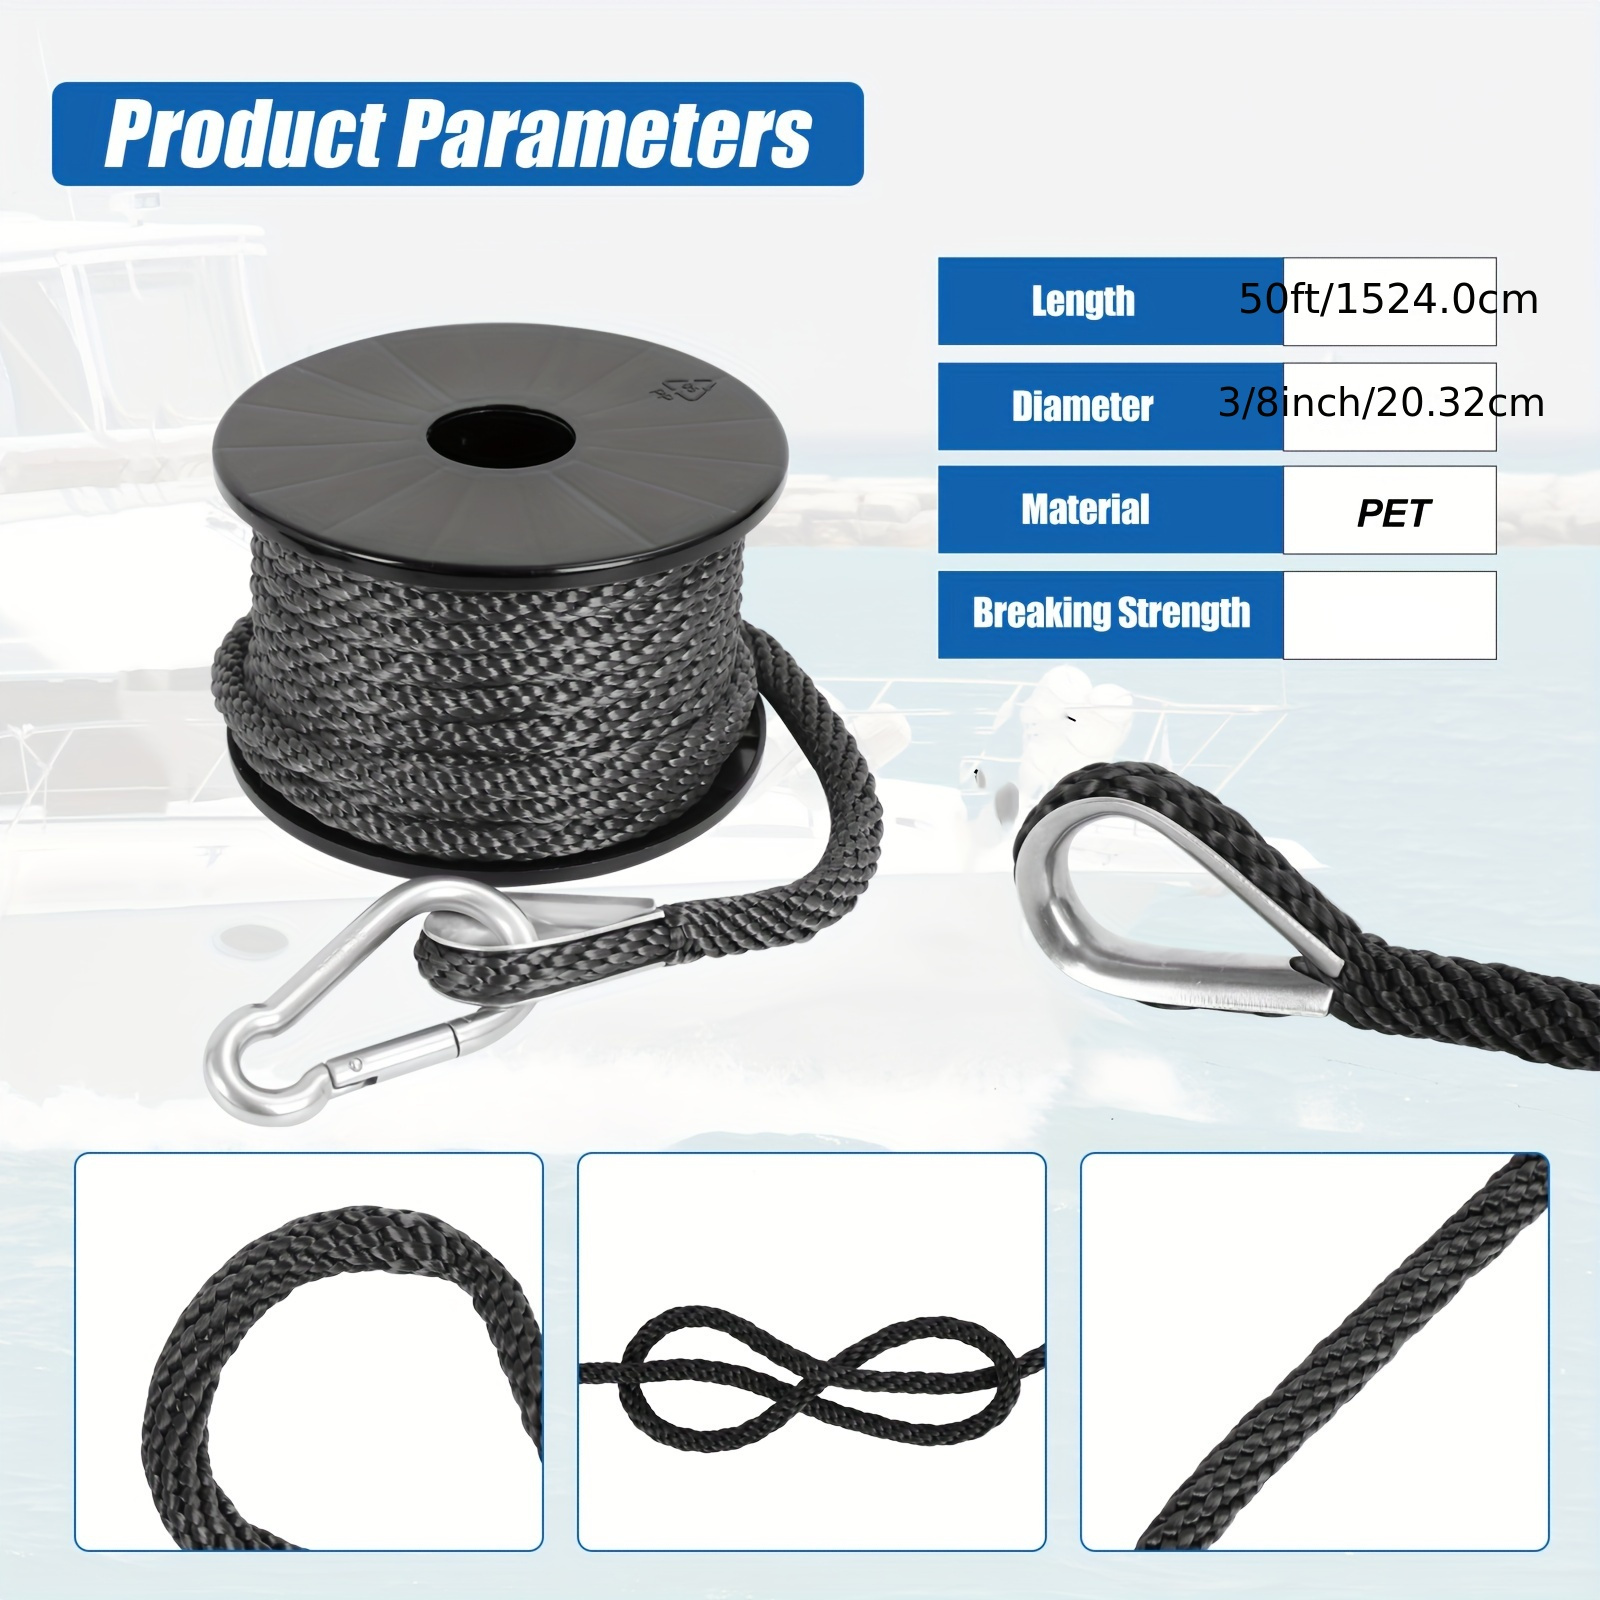 300FT OF NEW 10mm ANCHOR ROPE BOAT MOORING 1